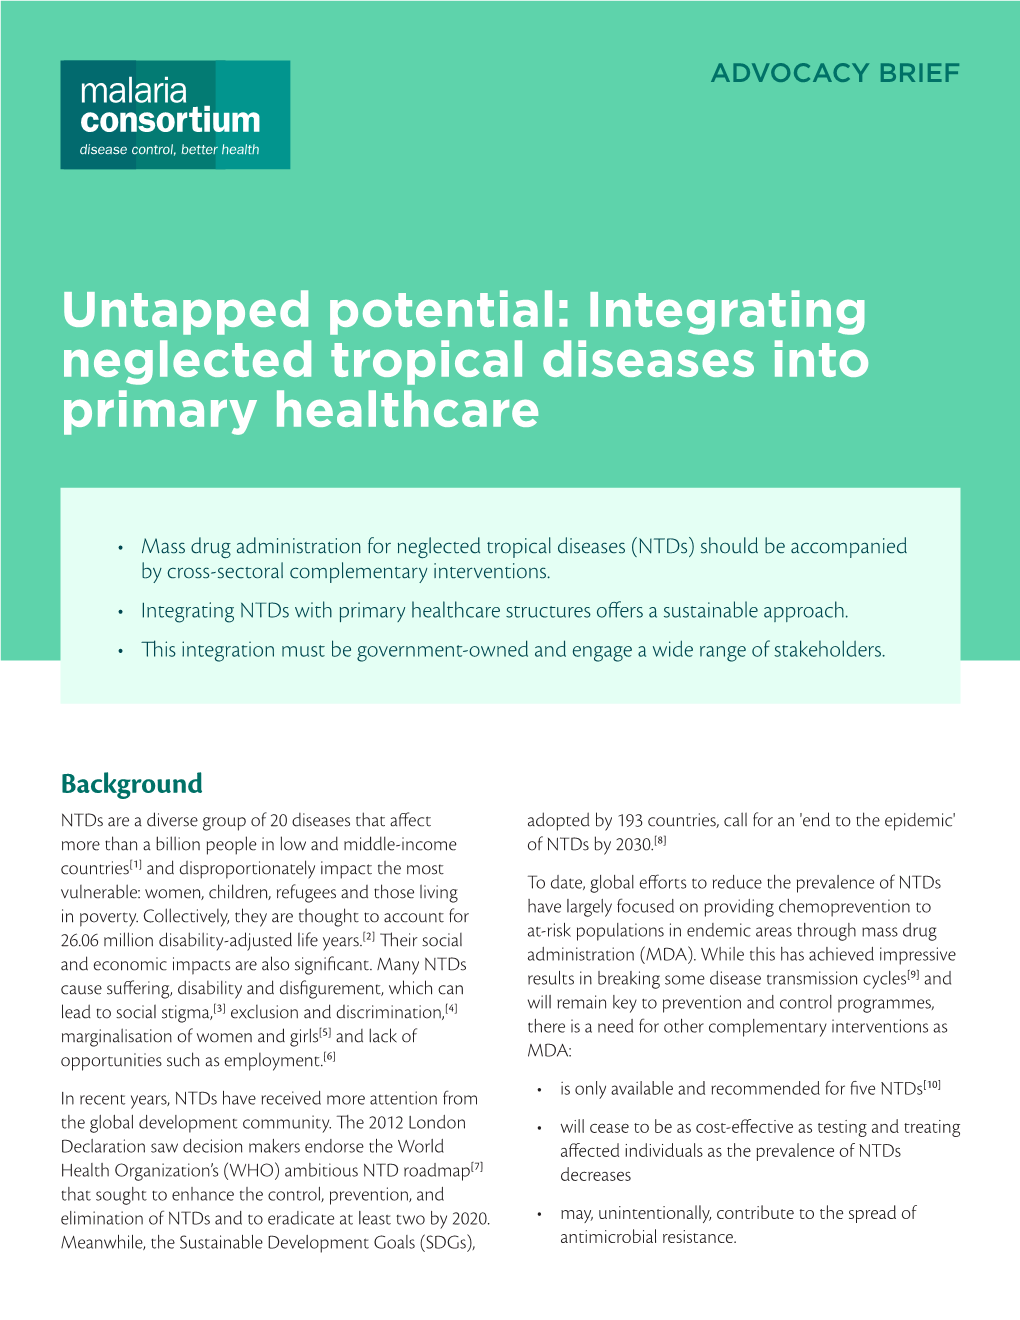 Integrating Neglected Tropical Diseases Into Primary Healthcare